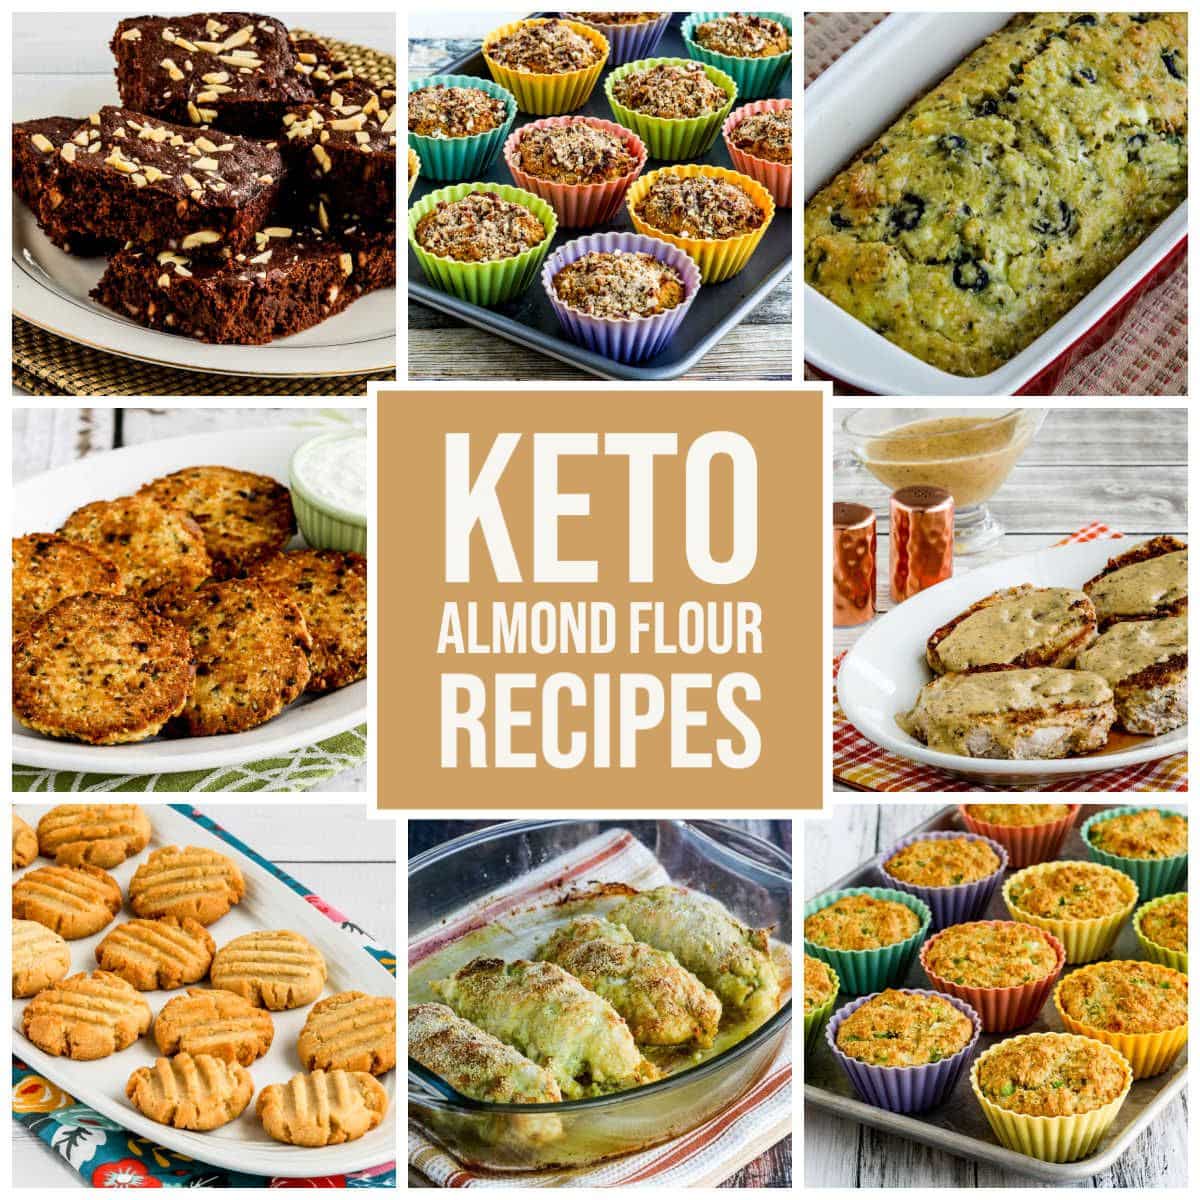 Keto Almond Flour Recipes text-overlay collage of featured recipes